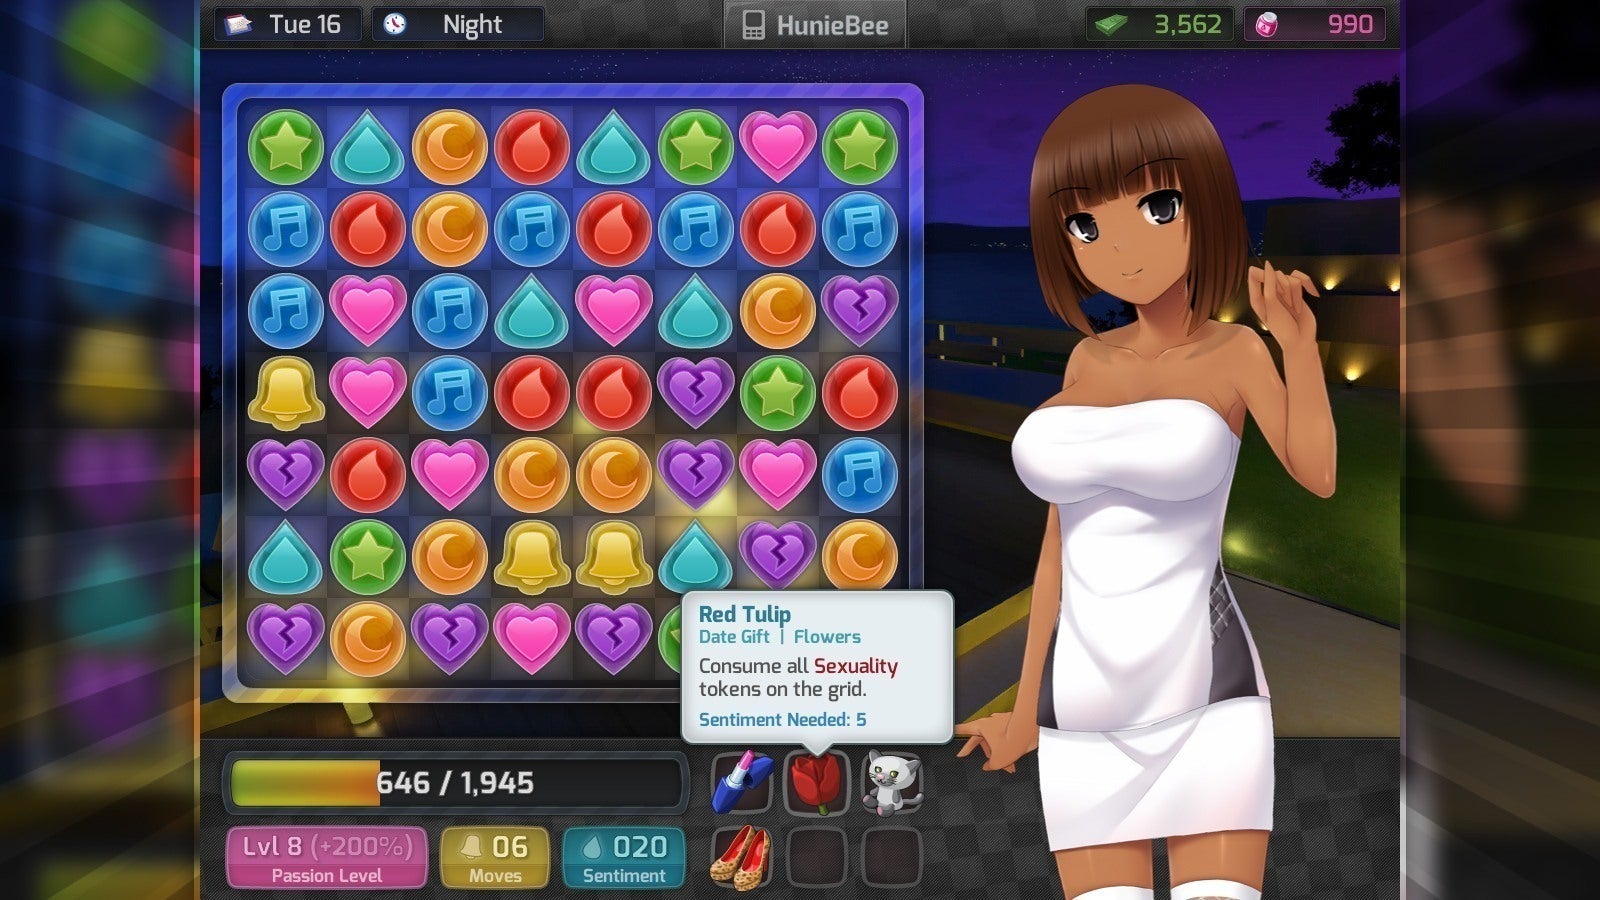 buta dhillon recommends how to get huniepop uncensored pic